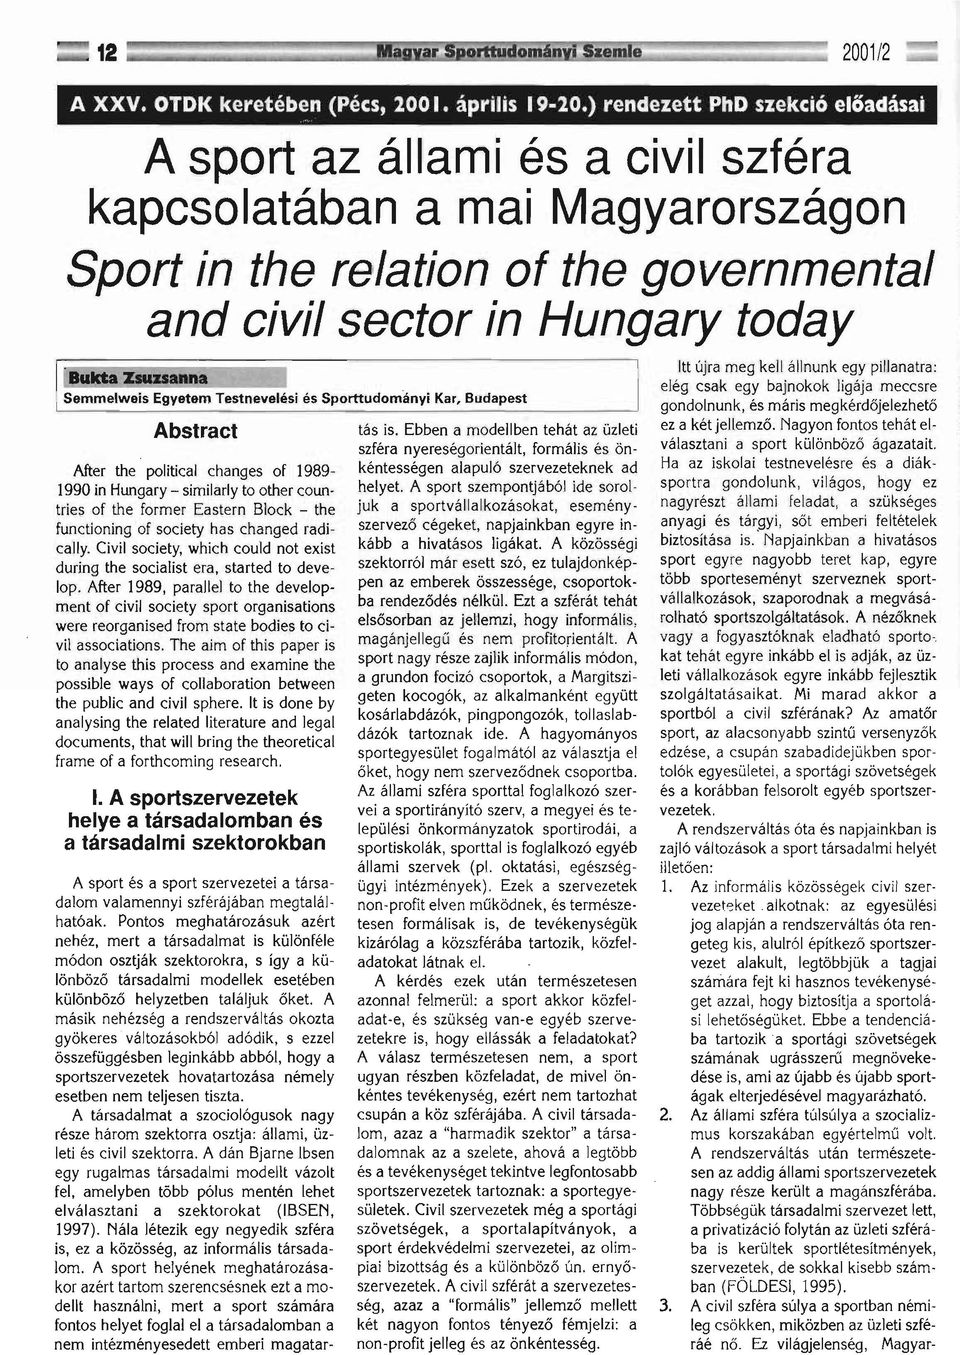 Egyetem Testnevelési és Sporttudományi Kar, Budapest Abstract After the political changes of 1989 1990 in Hungary - similarly to other countries of the former Eastern Block - the functioning of